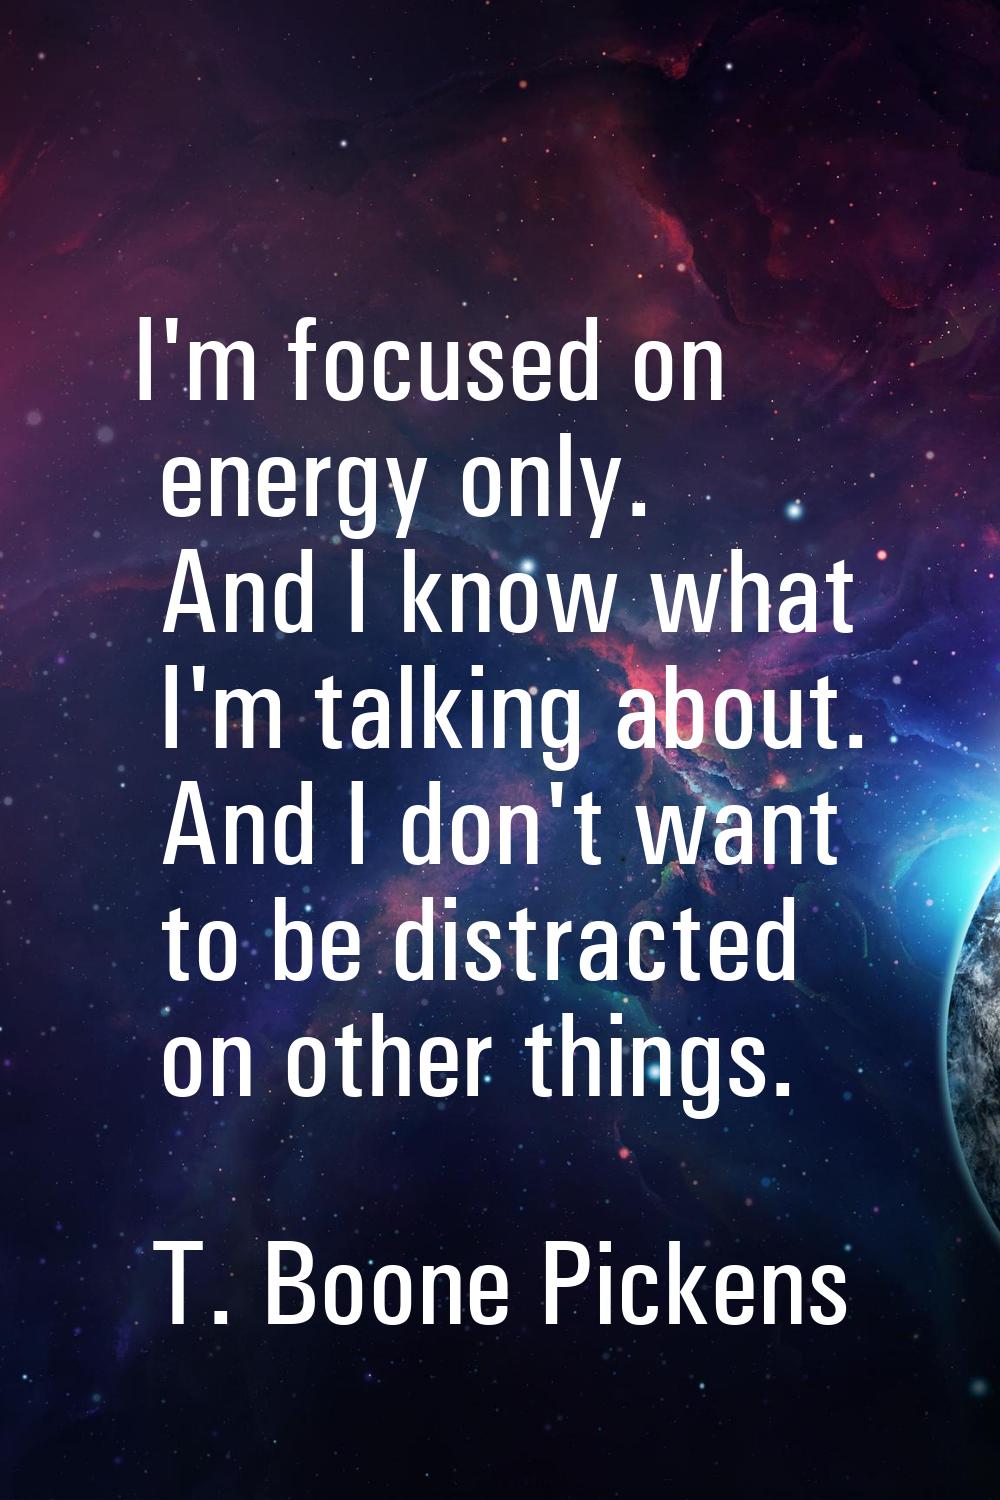 I'm focused on energy only. And I know what I'm talking about. And I don't want to be distracted on